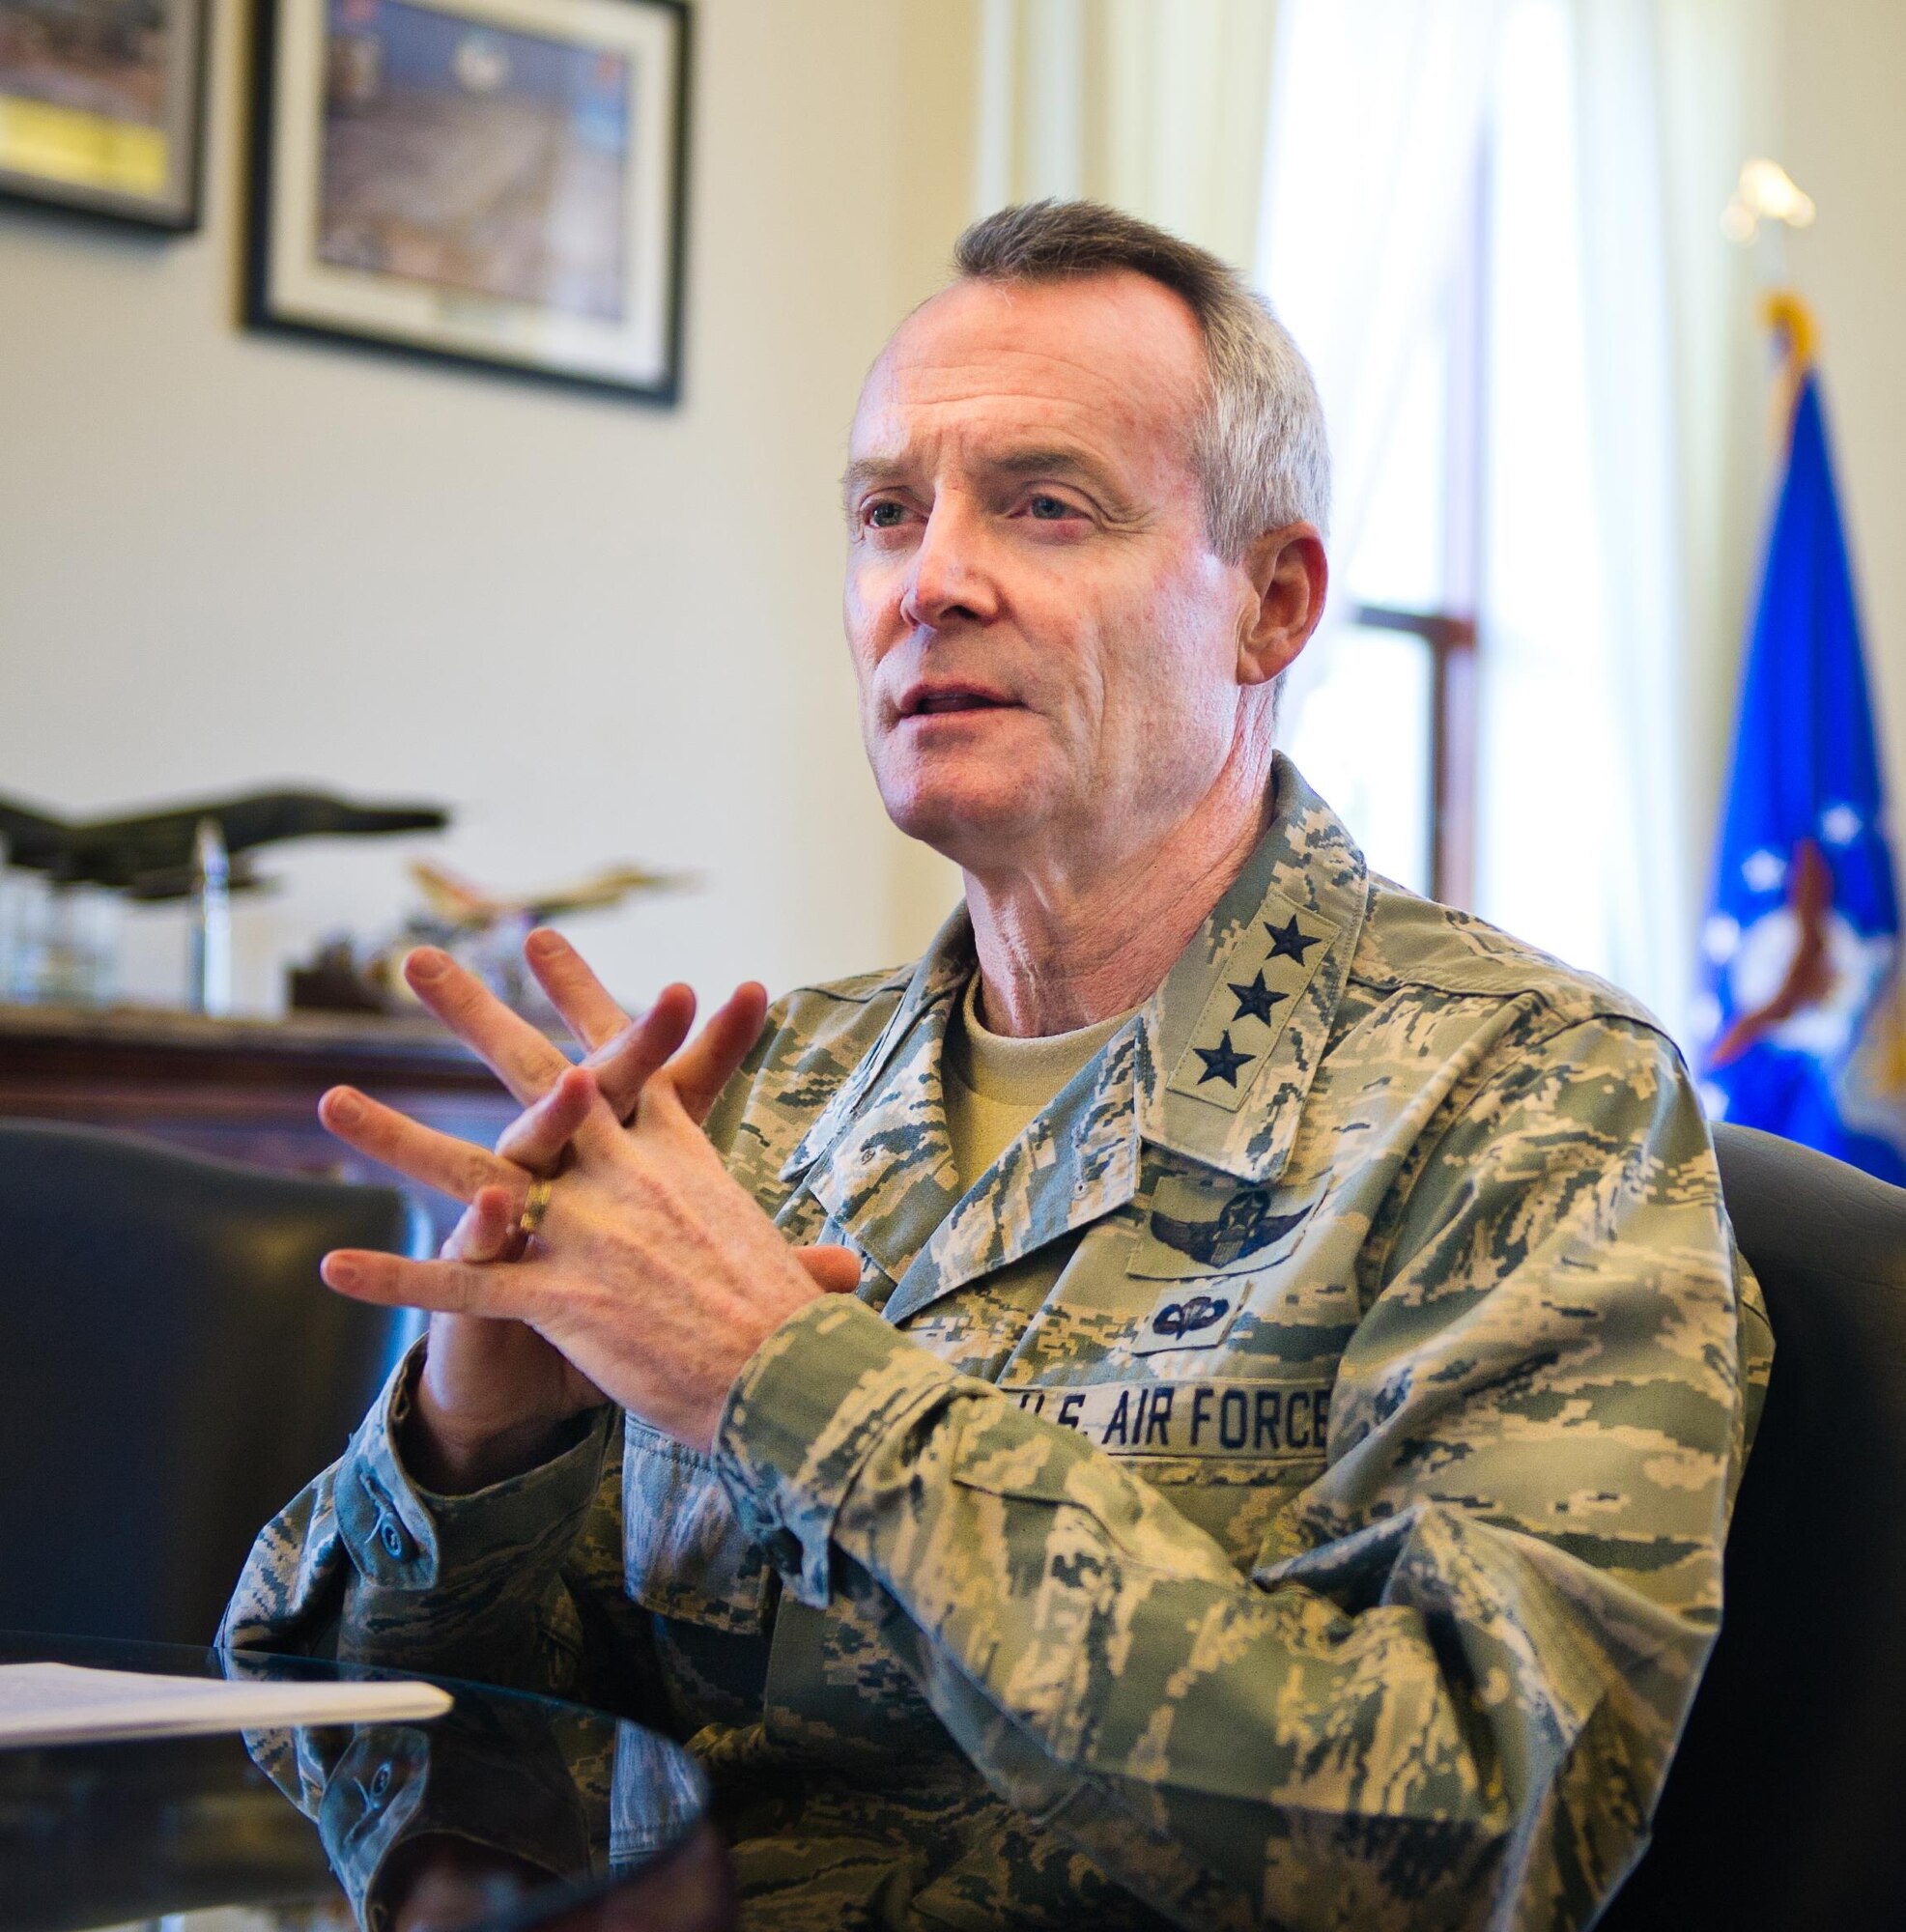 Lt. Gen. Darryl Roberson, Air Education and Training Command commander, discusses his philosophy on safety and mishap prevention during an interview at Joint Base San Antonio-Randolph, Nov. 23,, 2015. (U.S. Air Force photo by Tech. Sgt. Sarayuth Pinthong/ Released)
